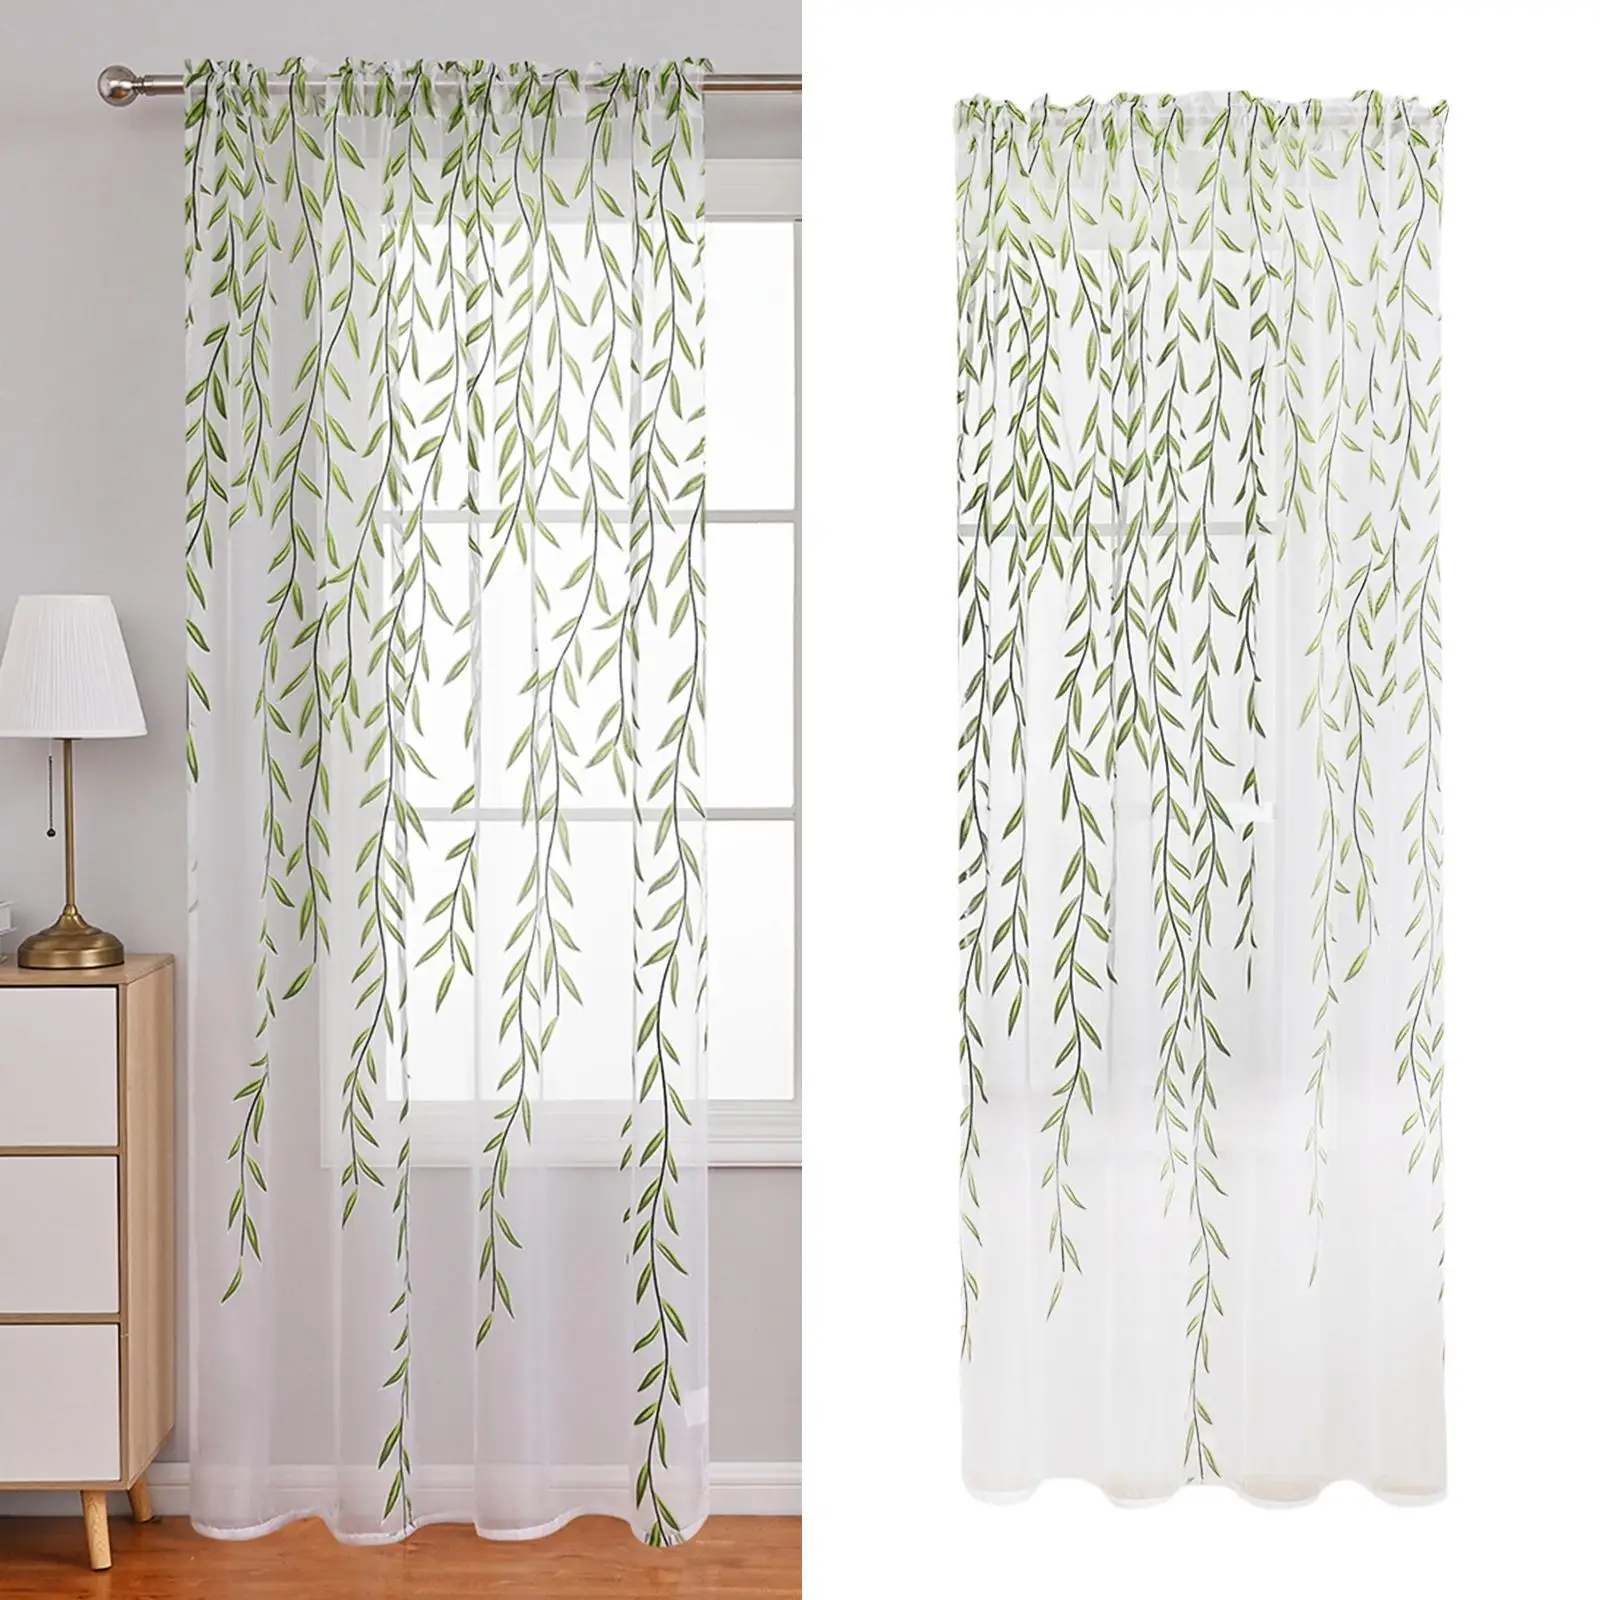 Gradient Embroidered Sheer Curtain Green Window Draperies Window Treatments Length Curtains Washable for Bedroom Children Living